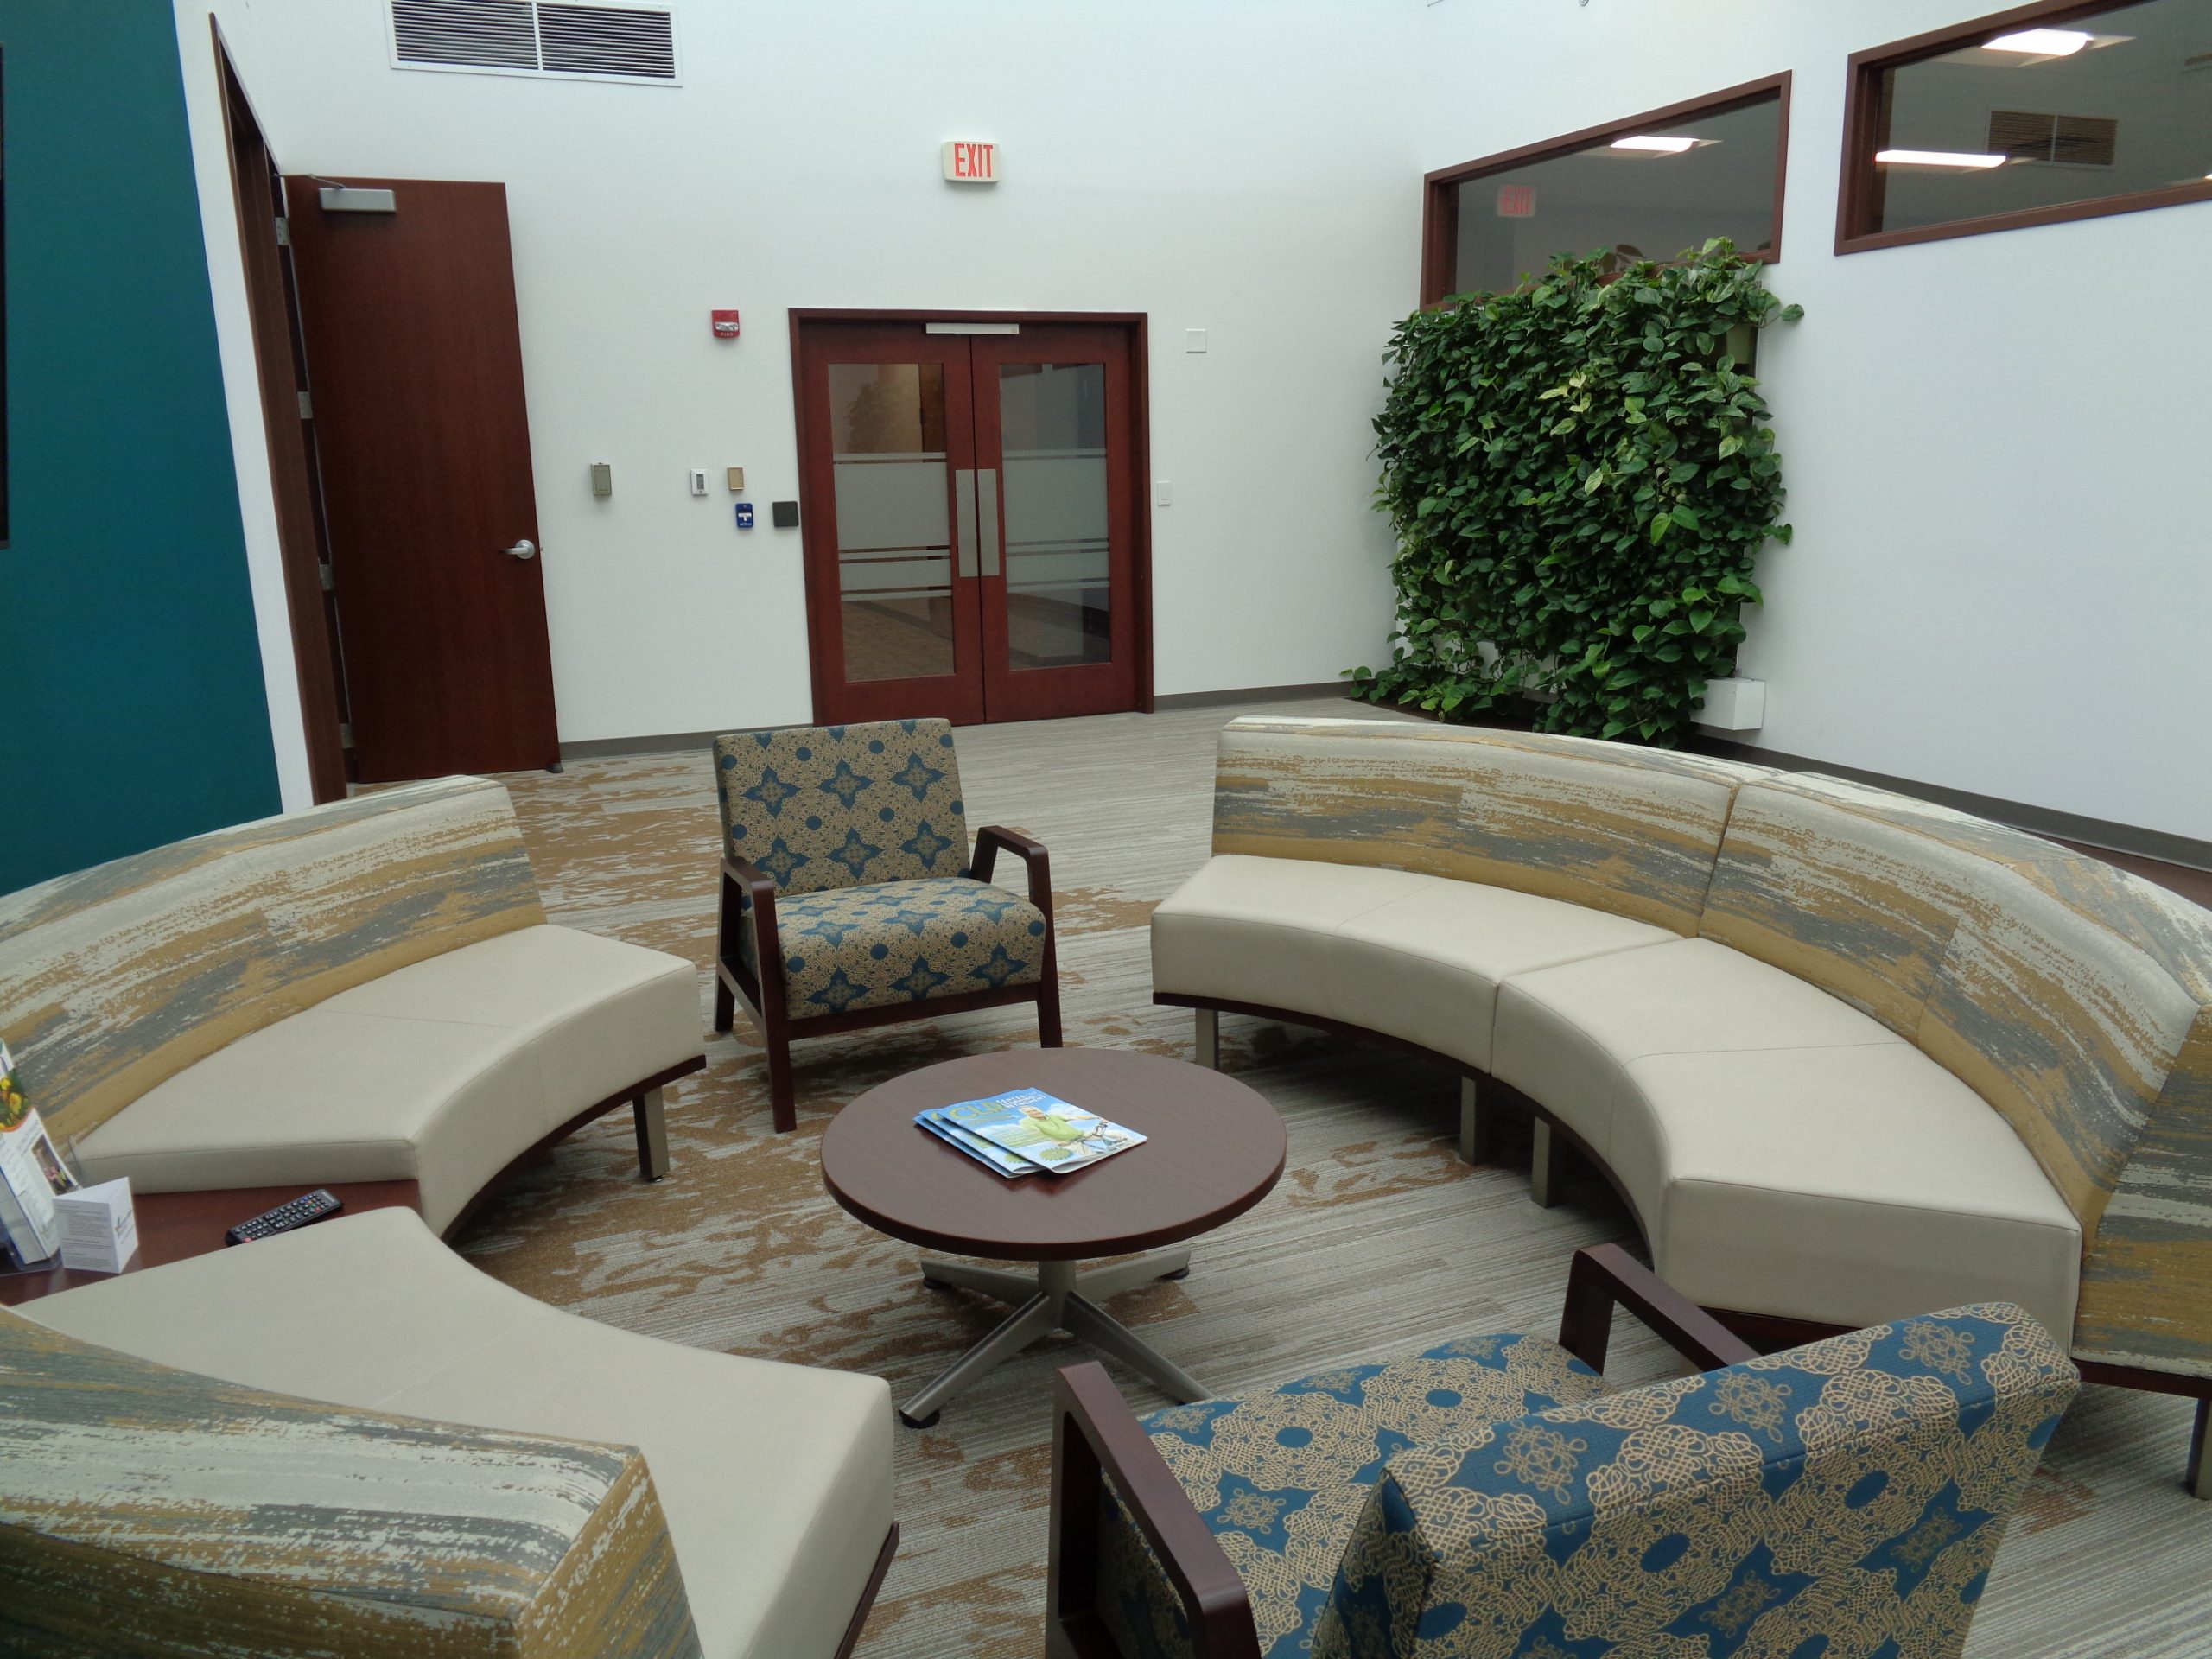 Seating Circle and Living Wall in Northern Illinois Hospice's Lobby